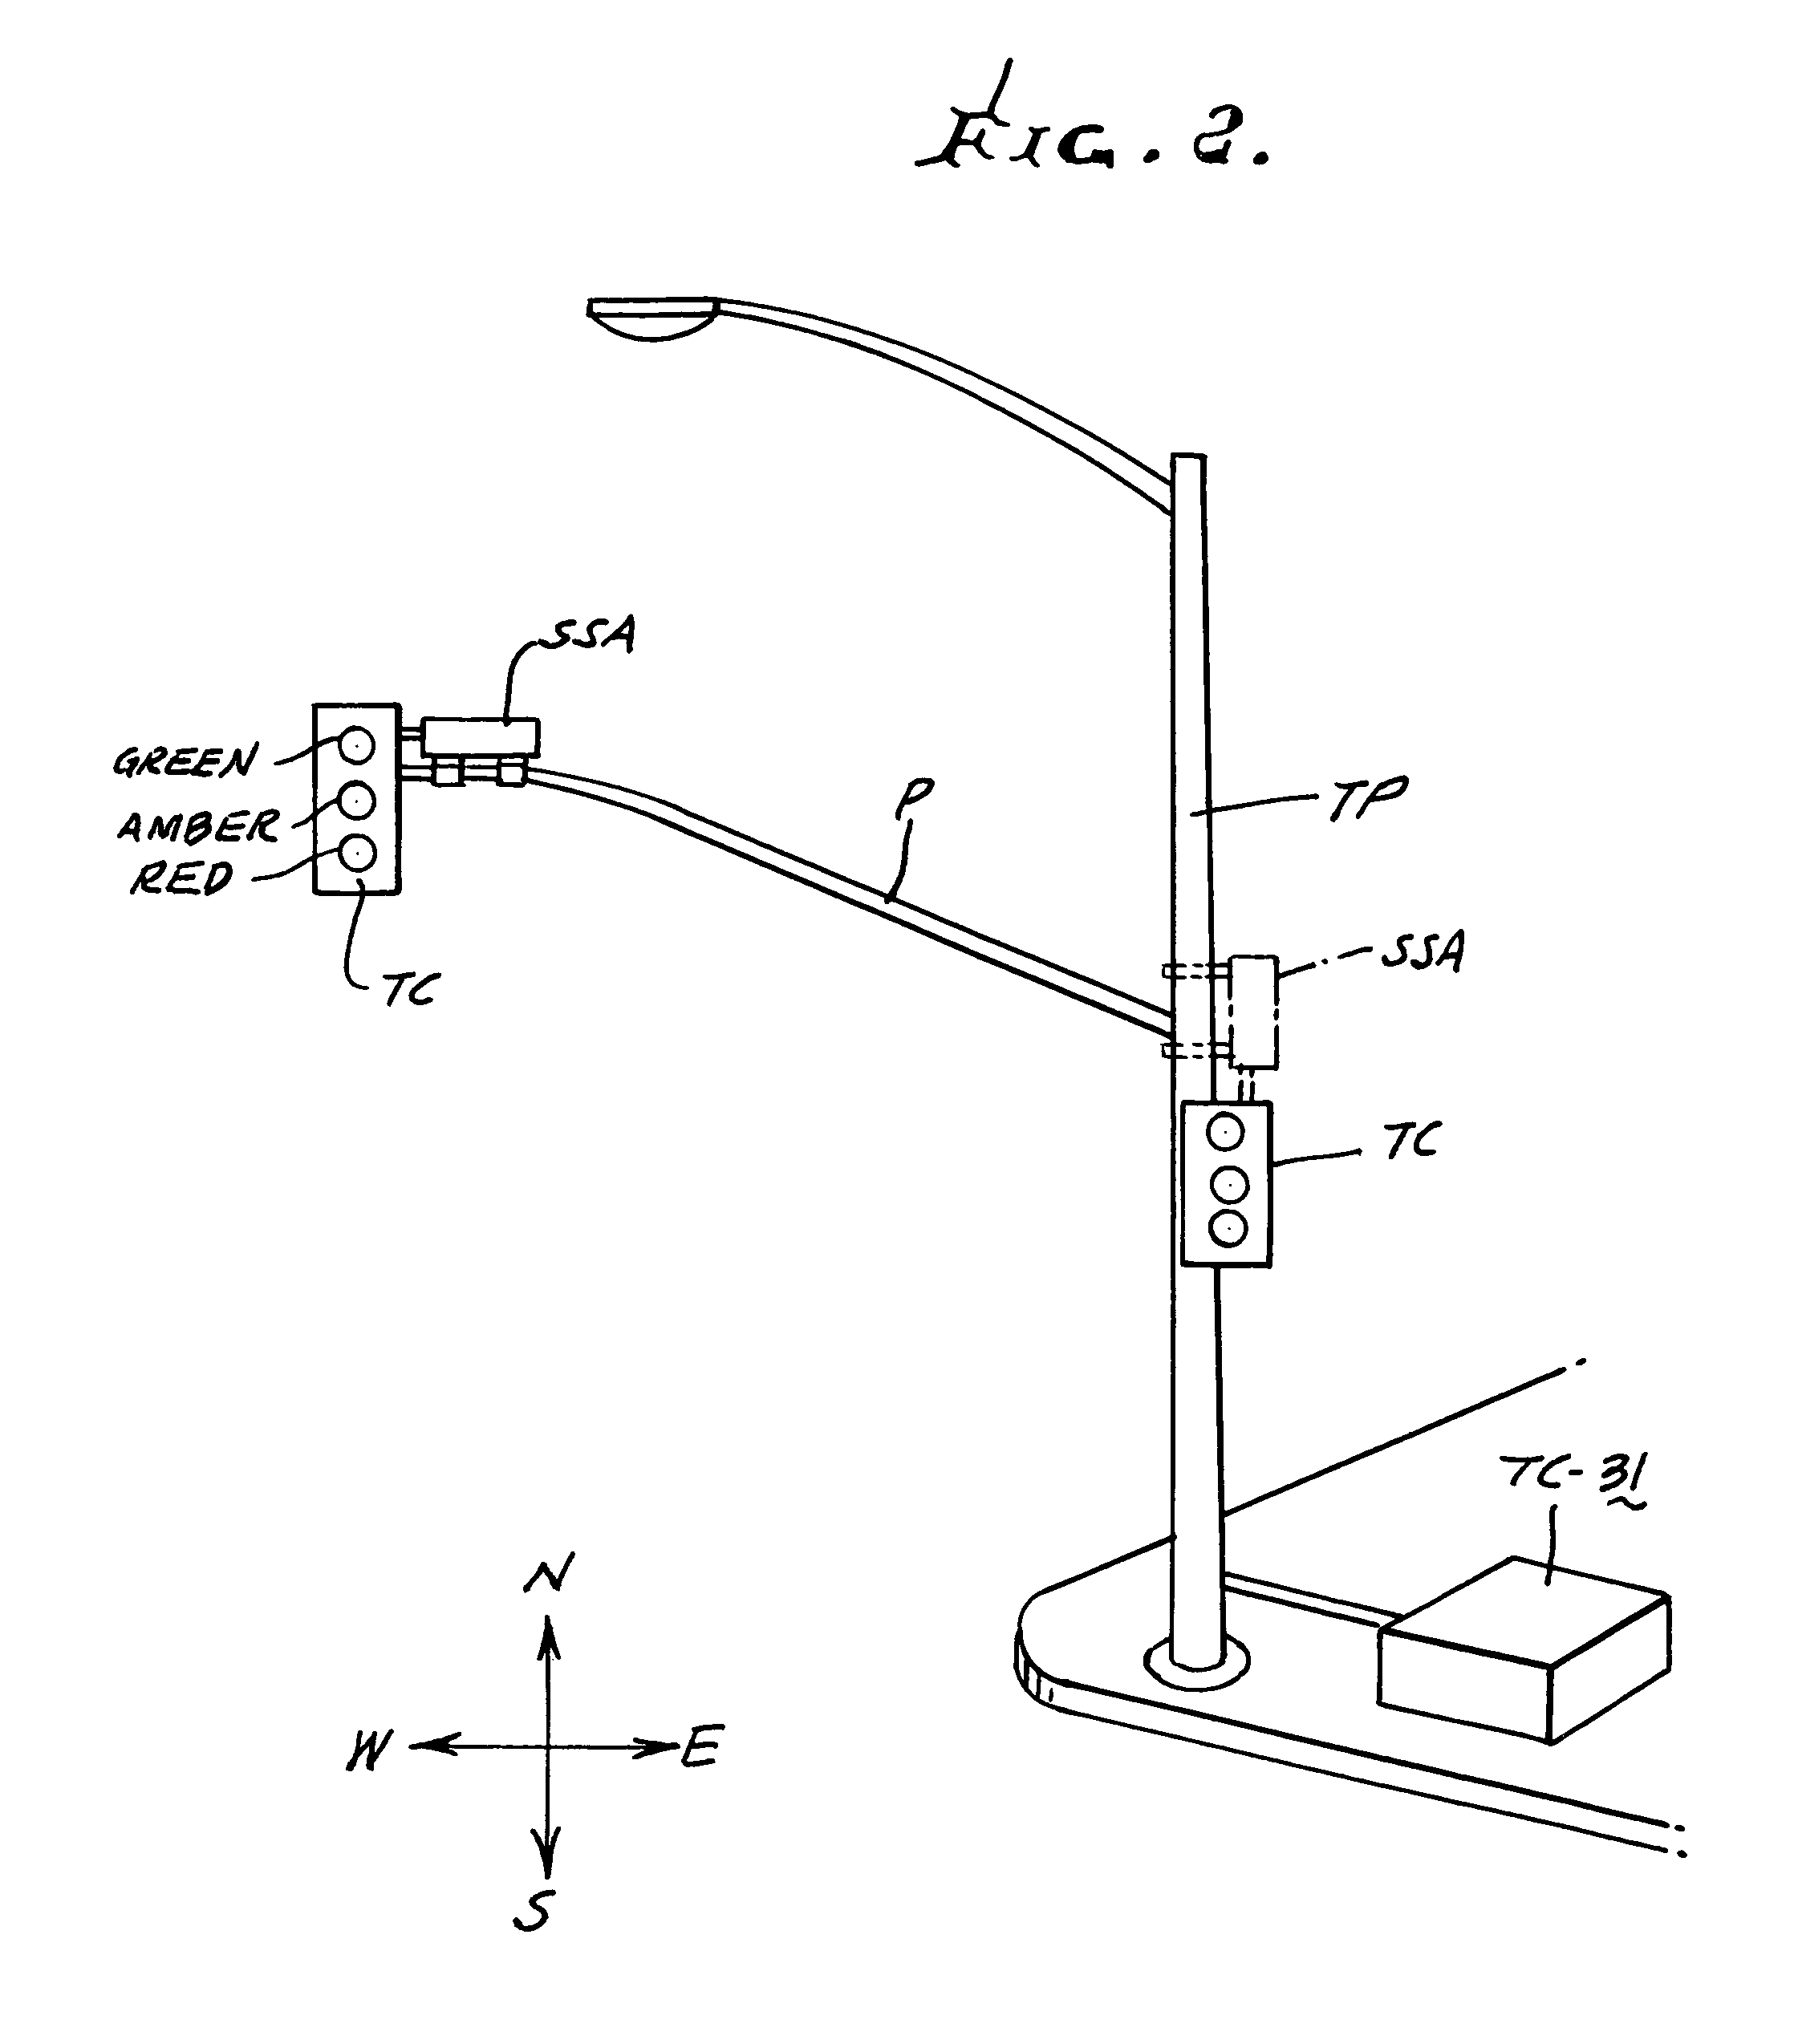 Methods and apparatus for electronically detecting siren sounds for controlling traffic control lights for signalling the right of way to emergency vehicles at intersections or to warn motor vehicle operators of an approaching emergency vehicle